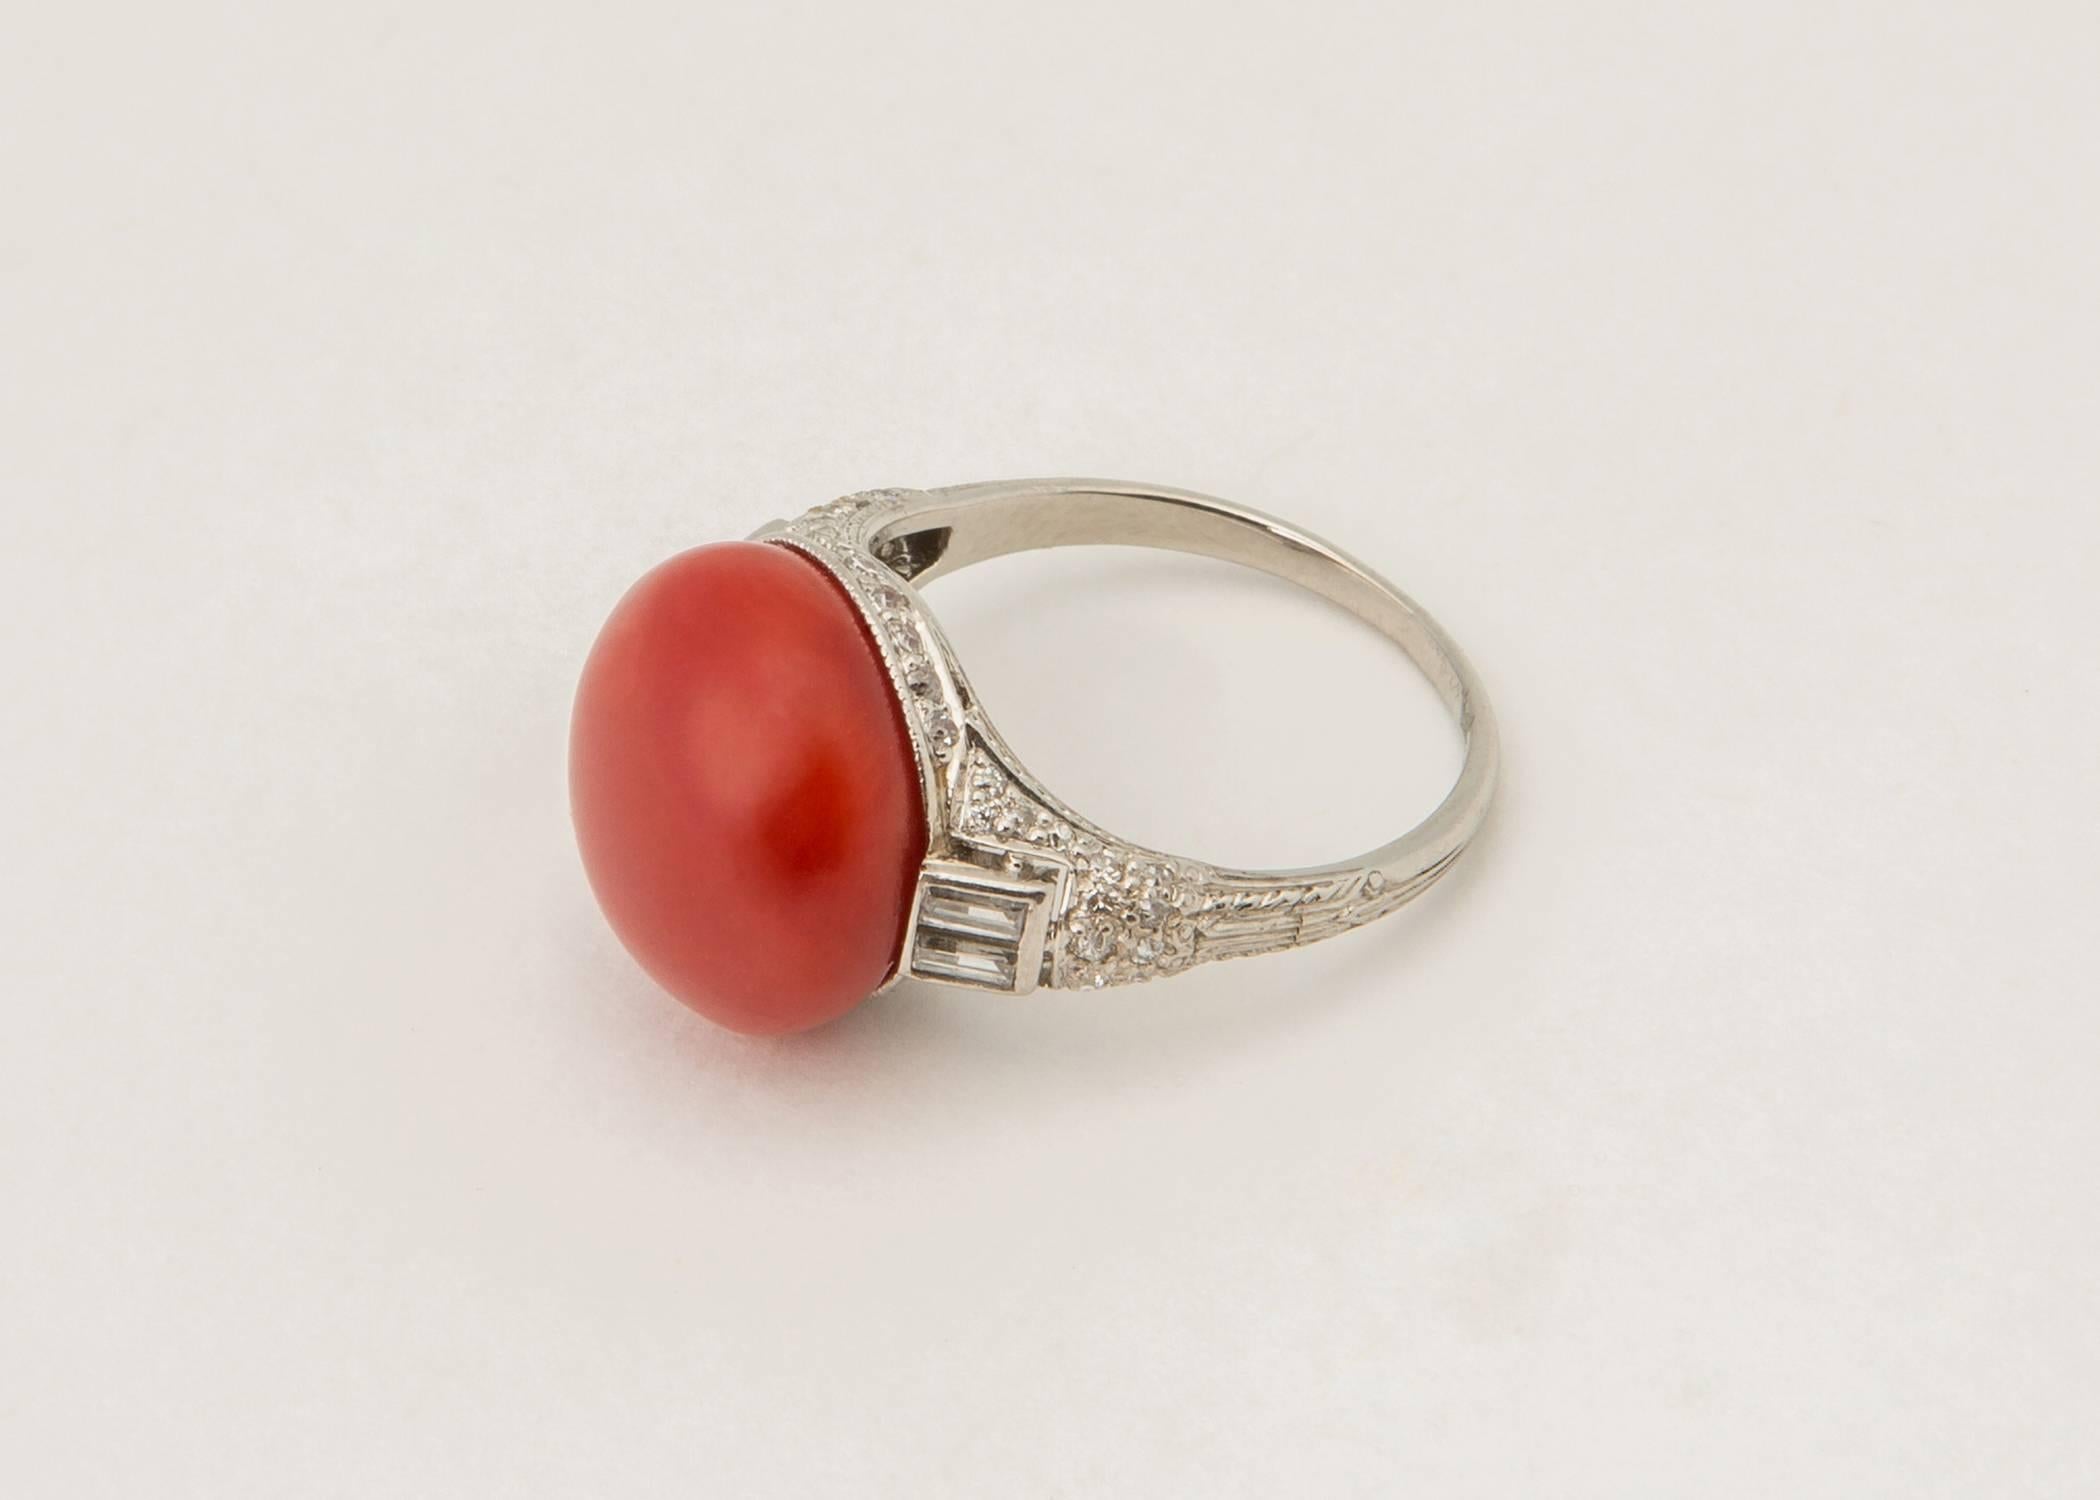 This elegant Art Deco platinum ring features a rare 13.50mm oxblood coral center. The most coveted rare color of coral. Baguette and brilliant cut diamonds are used to highlight and frame this collectable gem. Please view additional images. 